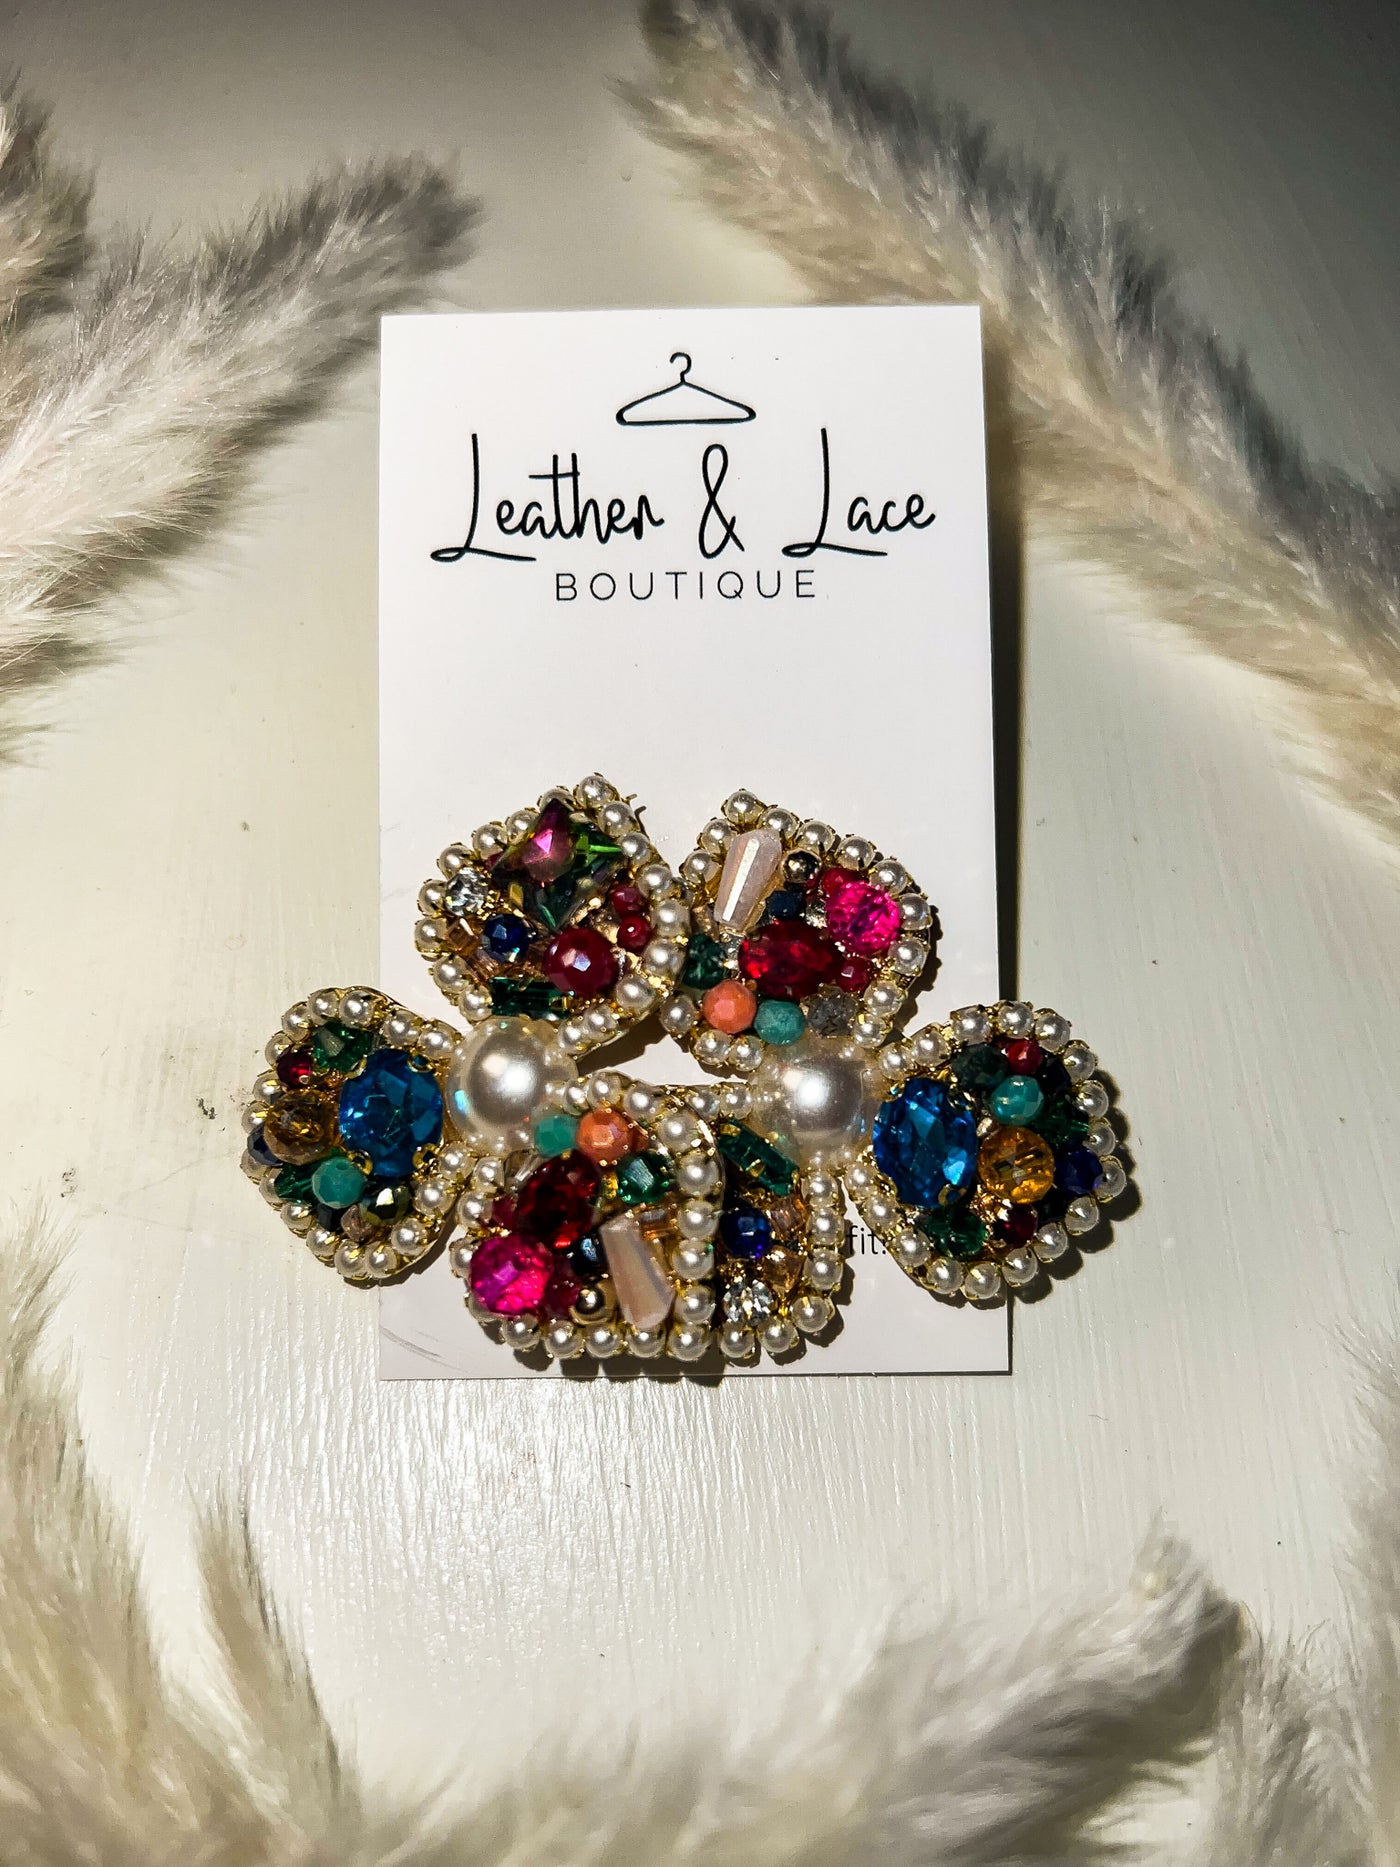 Lucky Me Bejeweled Flowers-190 - ACCESSORIES - JEWELRY-LEATHER & LACE-[option4]-[option5]-[option6]-Leather & Lace Boutique Shop